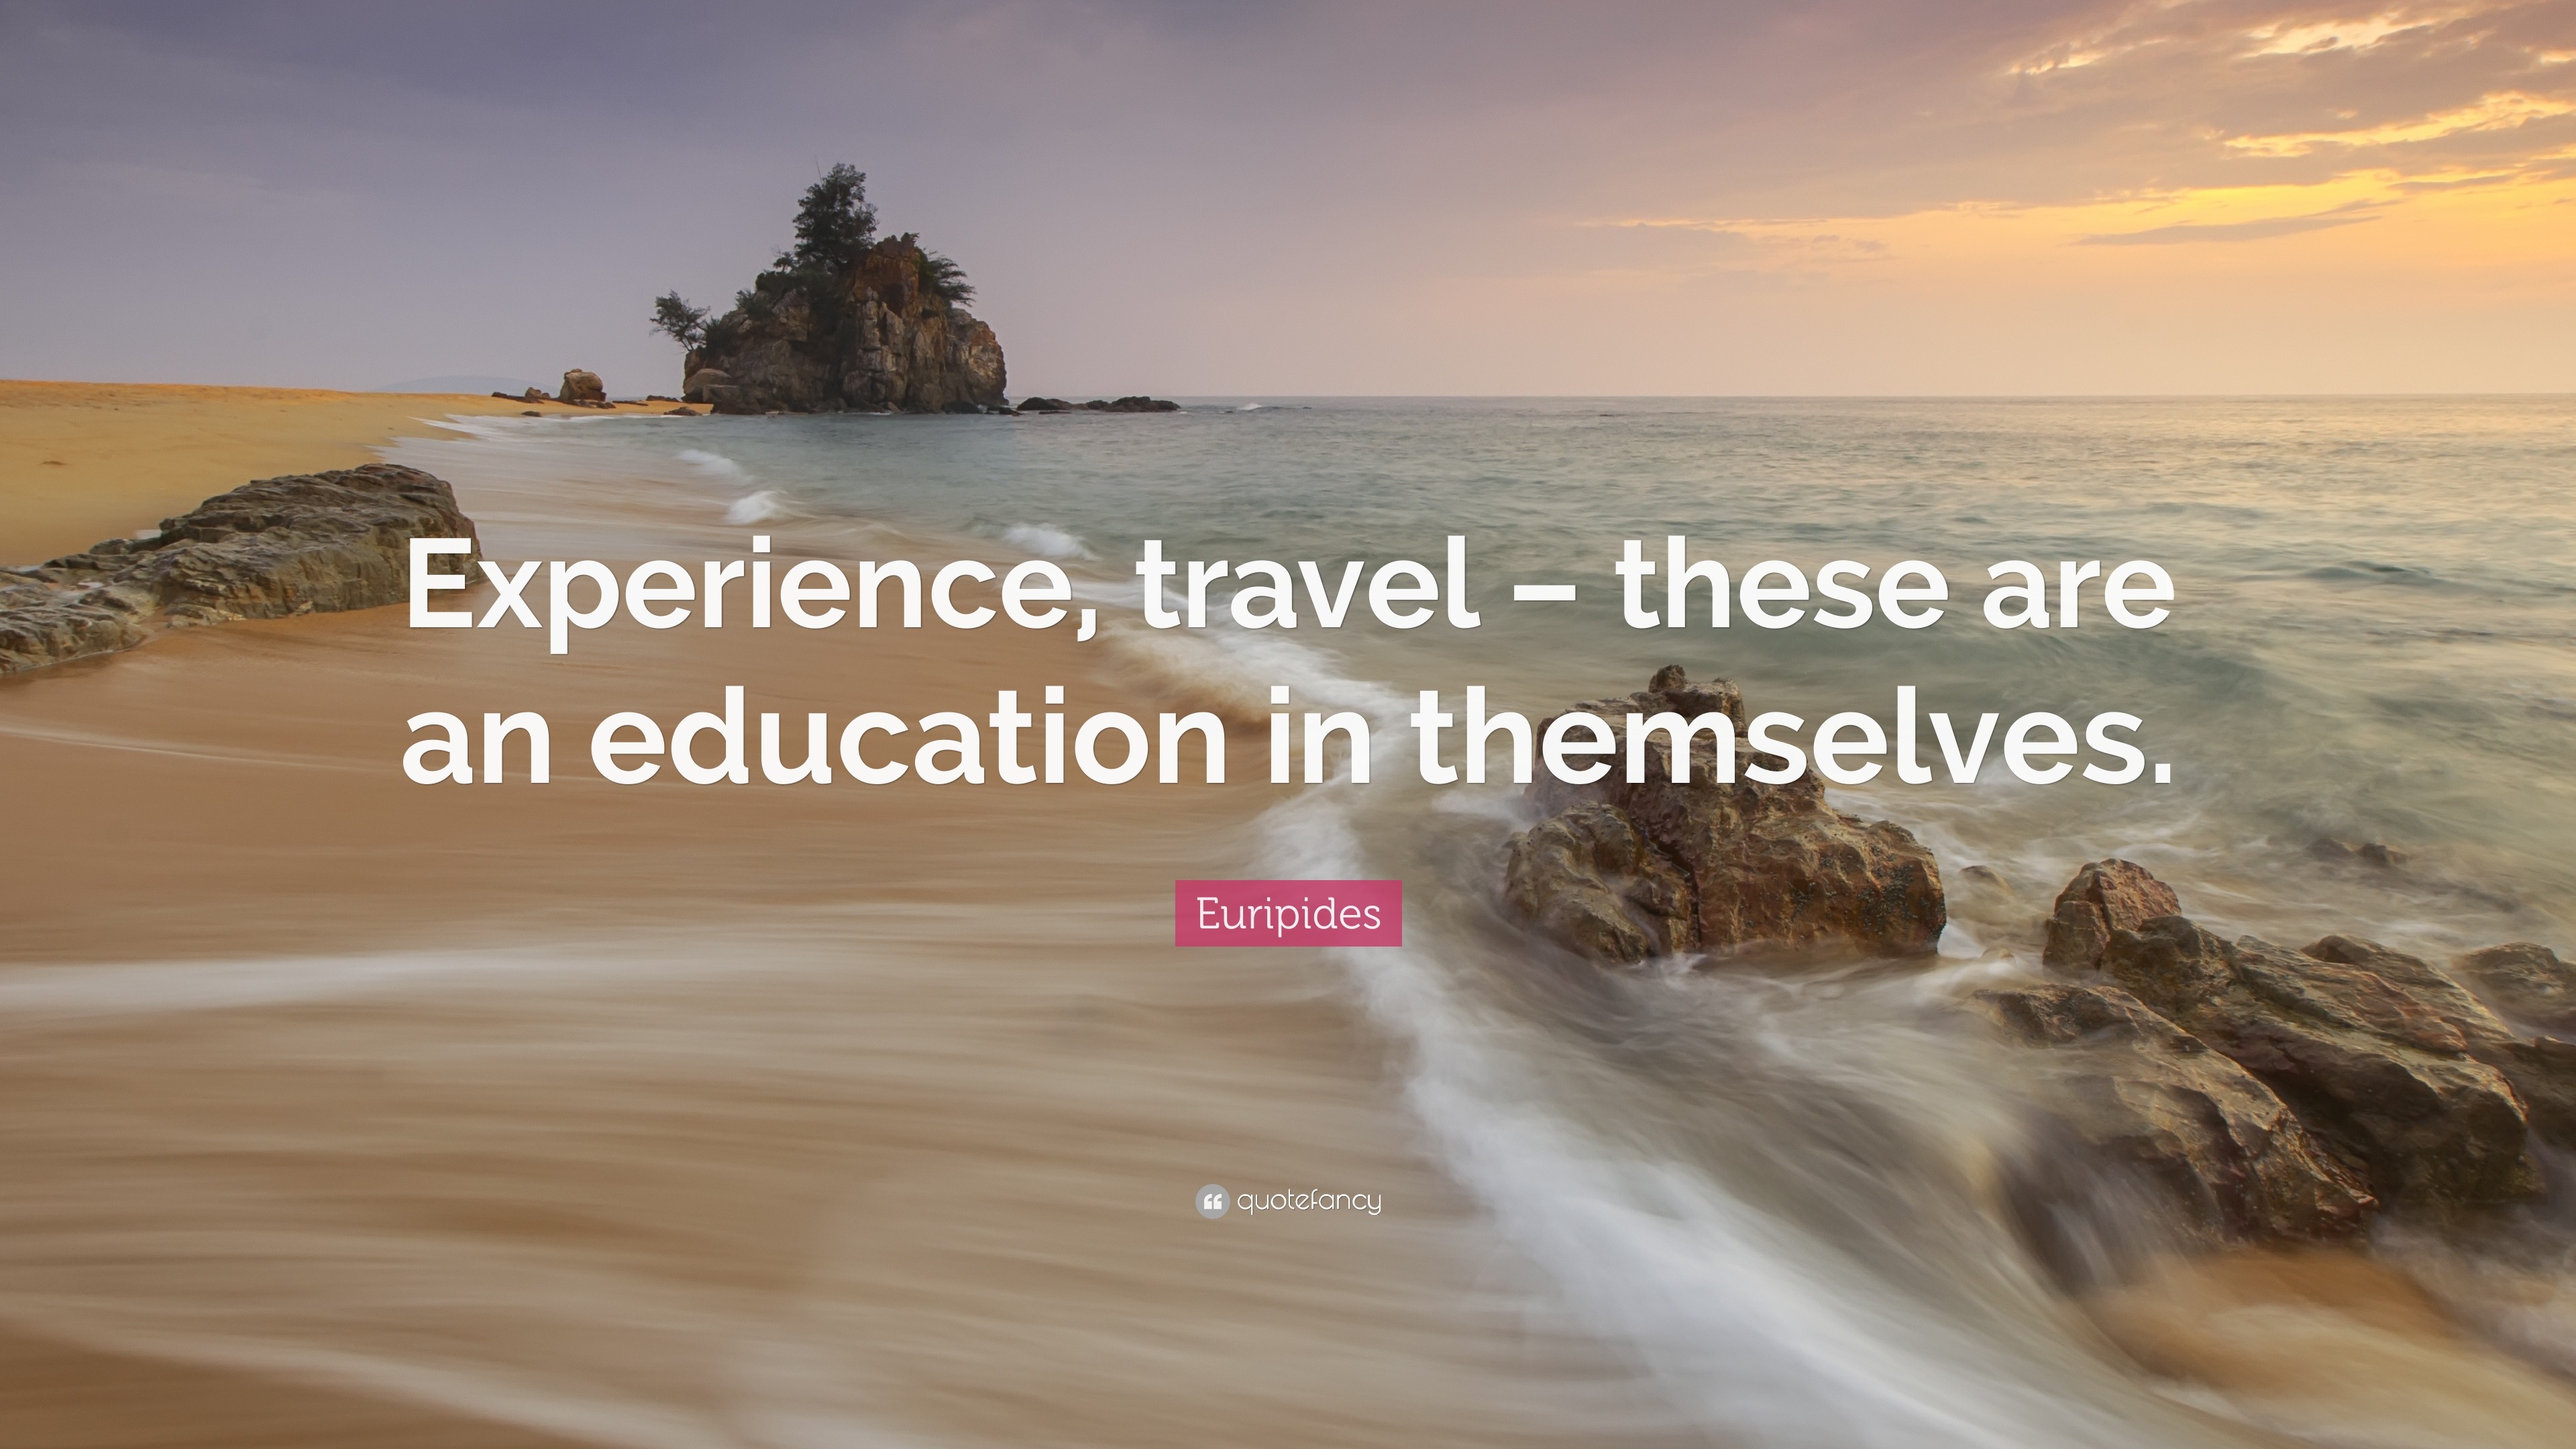 experience travel these are as education in themselves